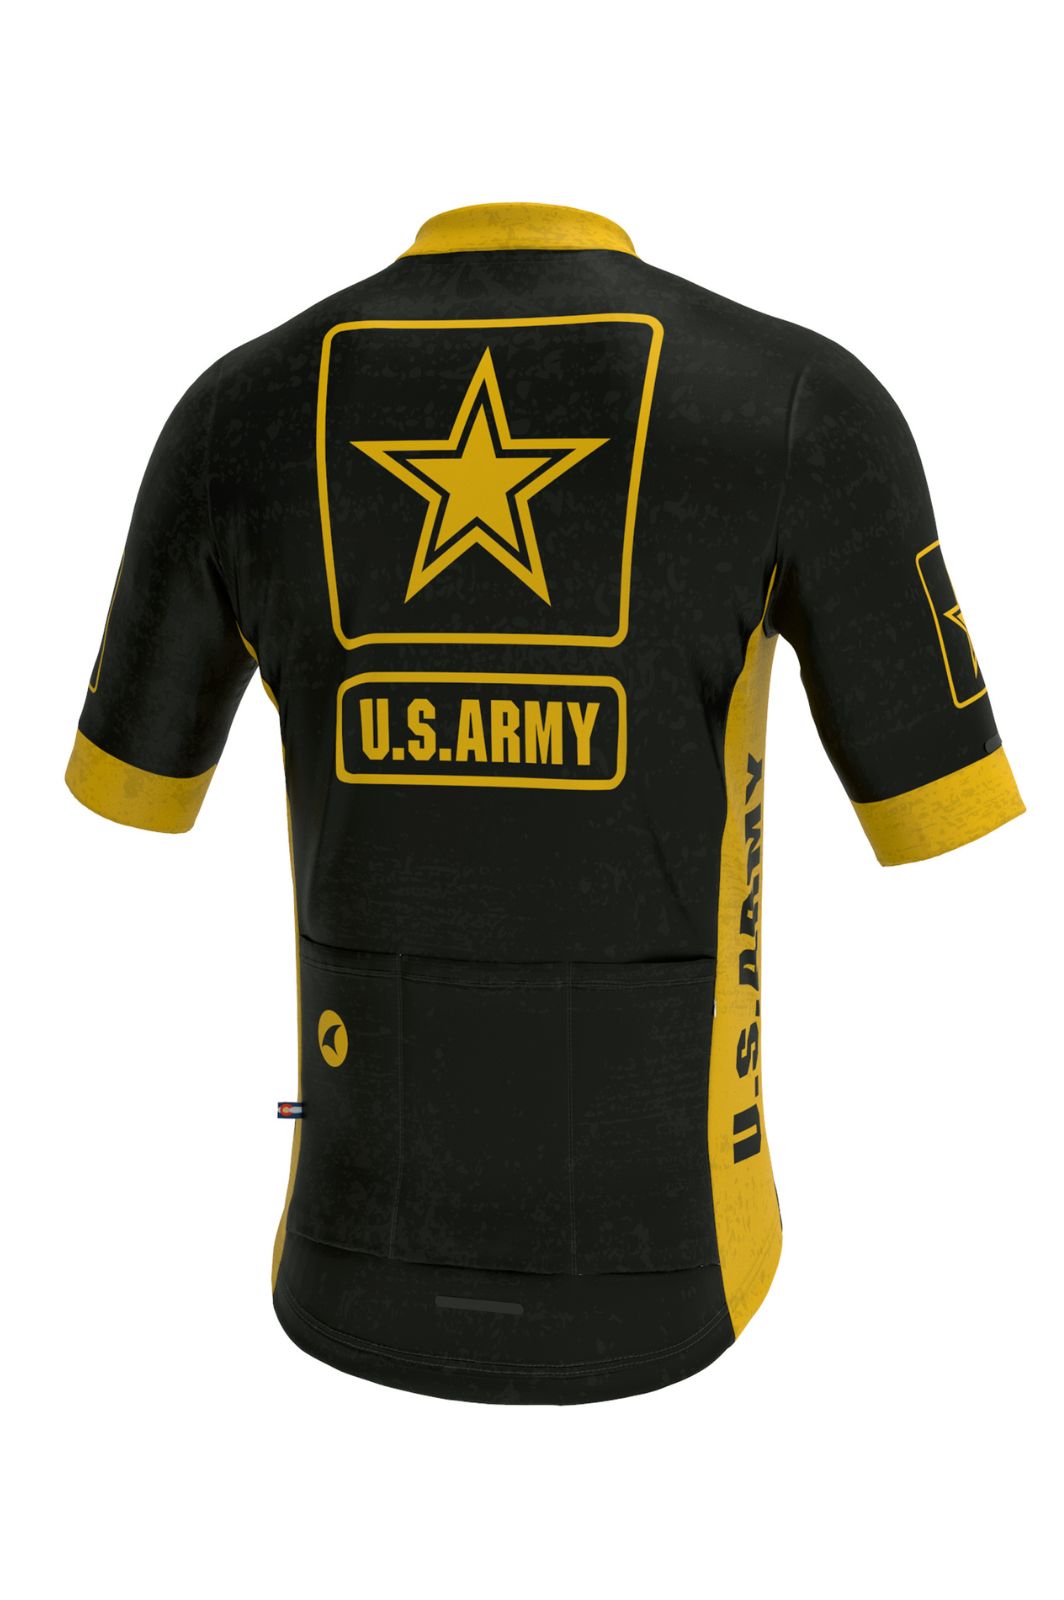 Men's US Army Cycling Jersey - Back View